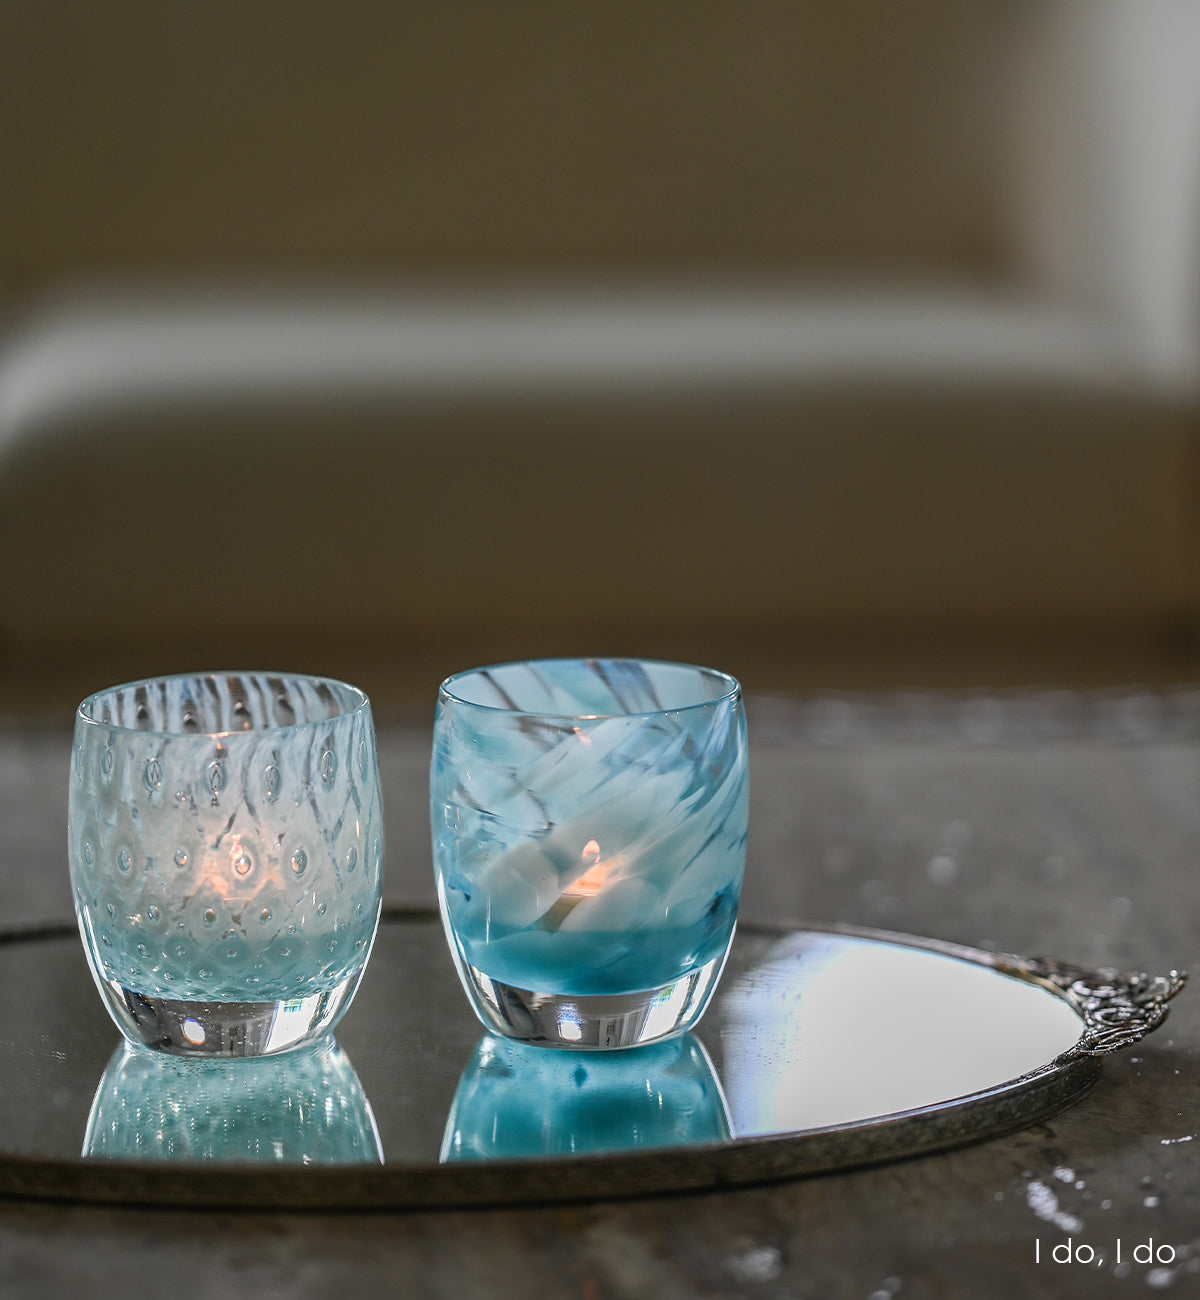 I do, I do is a set of two patterned light blue hand-blown glass candle holders. it includes good choice, a light blue bubble pattern and blessing a mottled blue pattern.